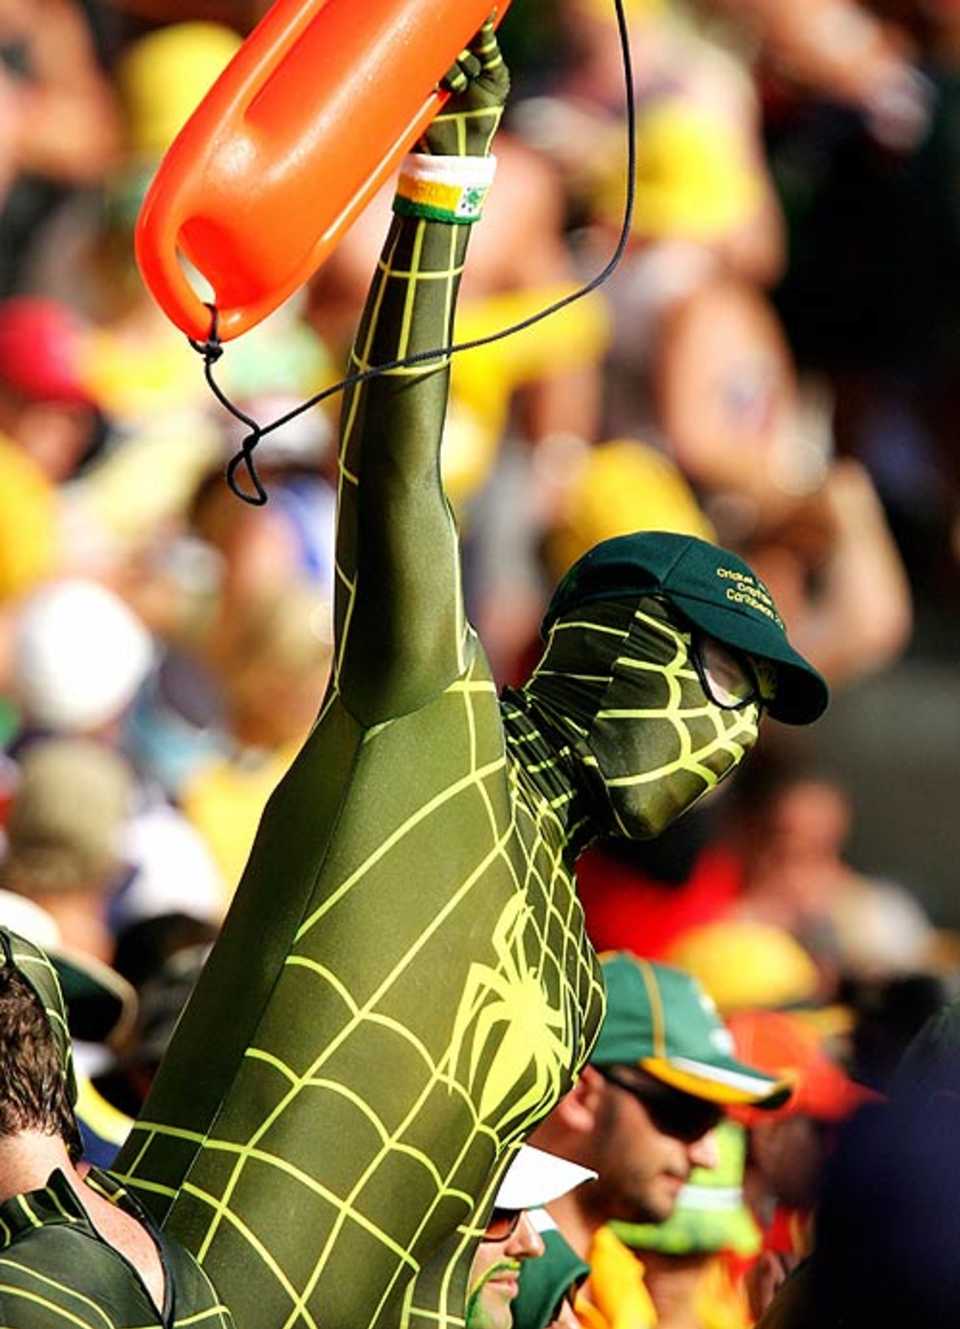 A fan dressed in a green and gold Spiderman outfit cheers for Australia